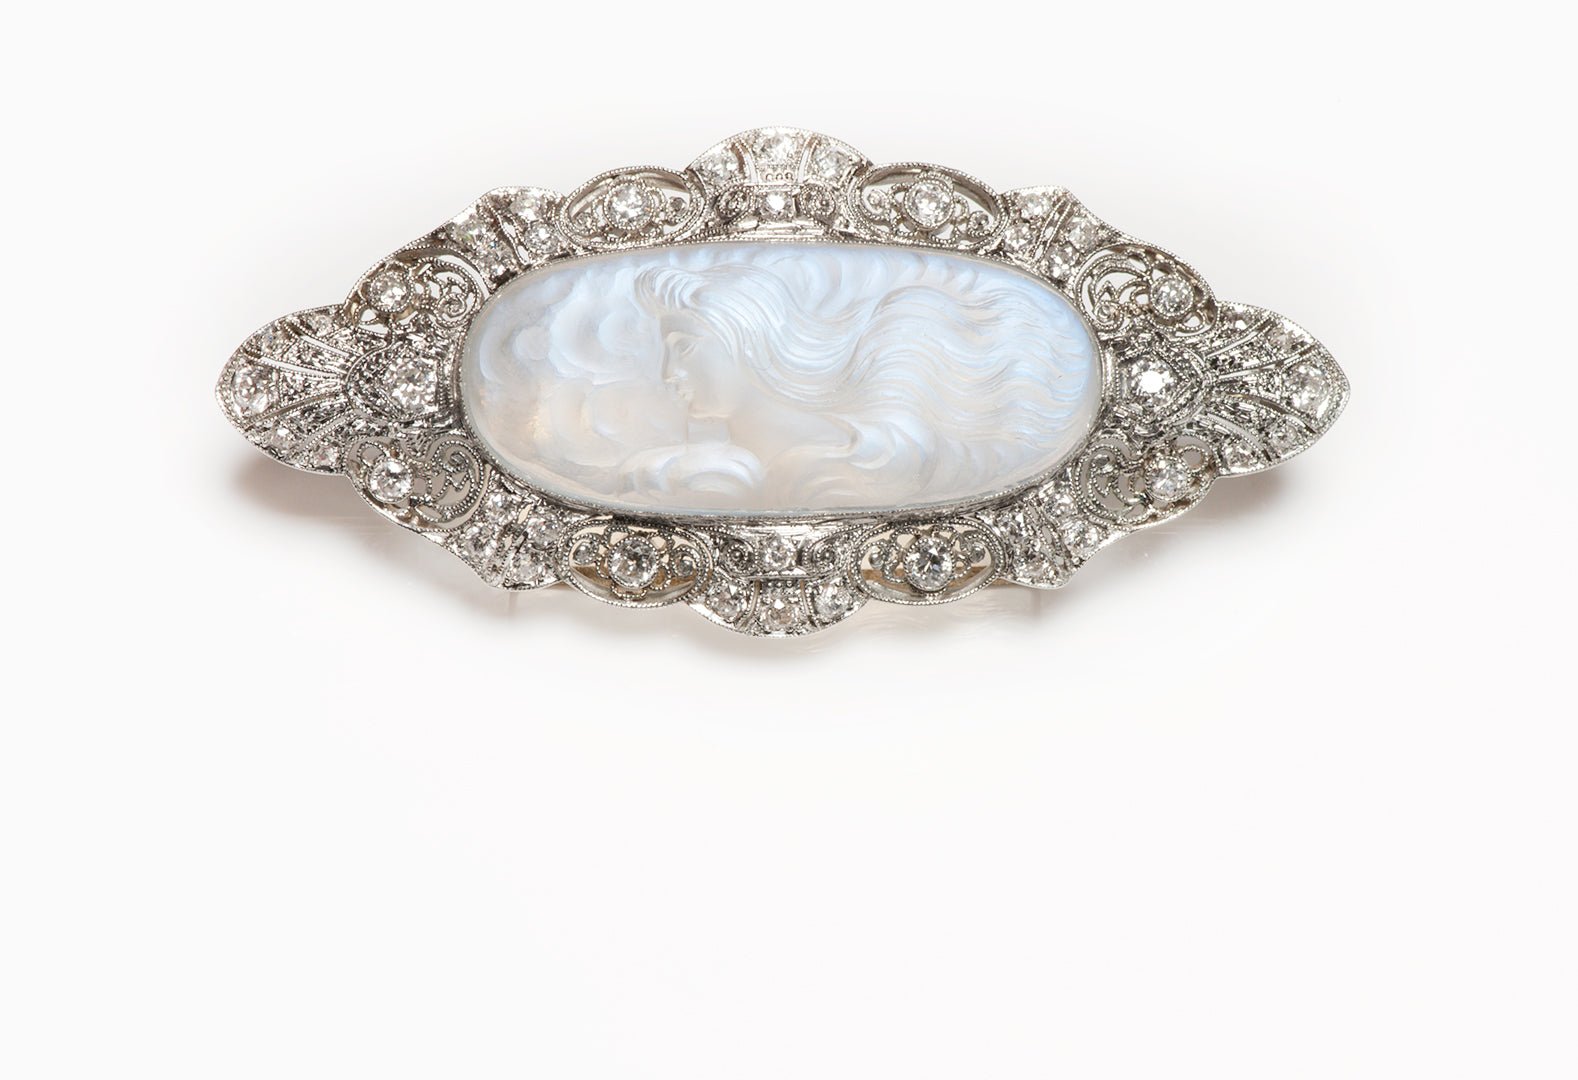 Antique Platinum Carved Moonstone Brooch - DSF Antique Jewelry